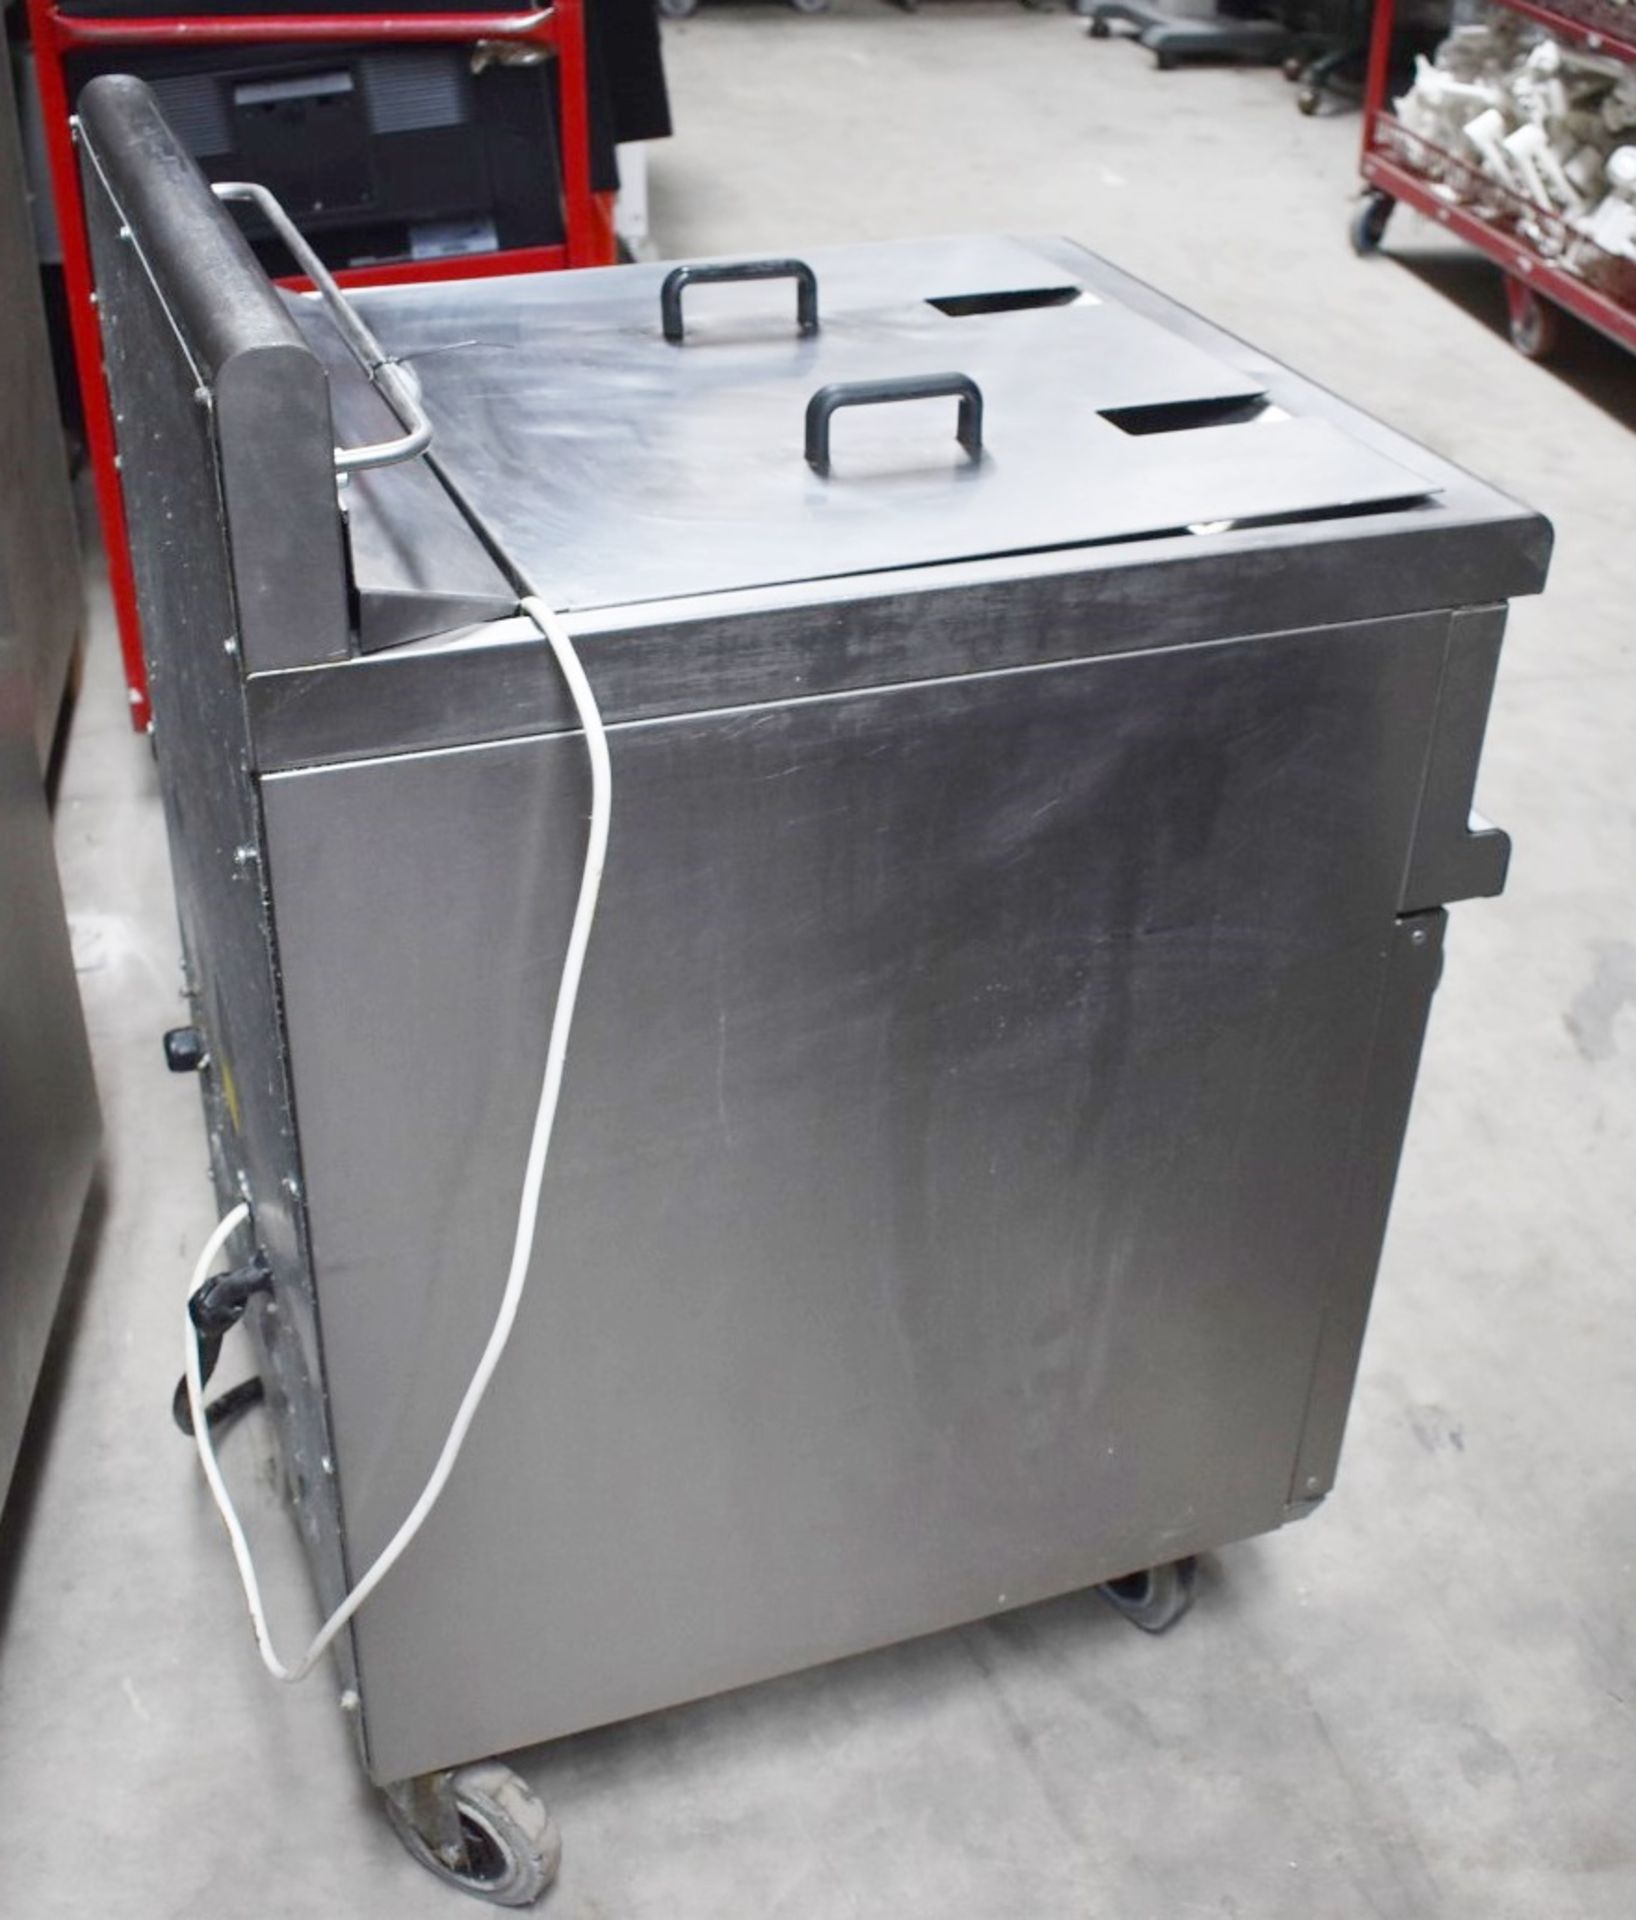 1 x Lincat Opus 700 Single Tank Electric Fryer With Built In Filtration - 3 Phase - Image 15 of 19